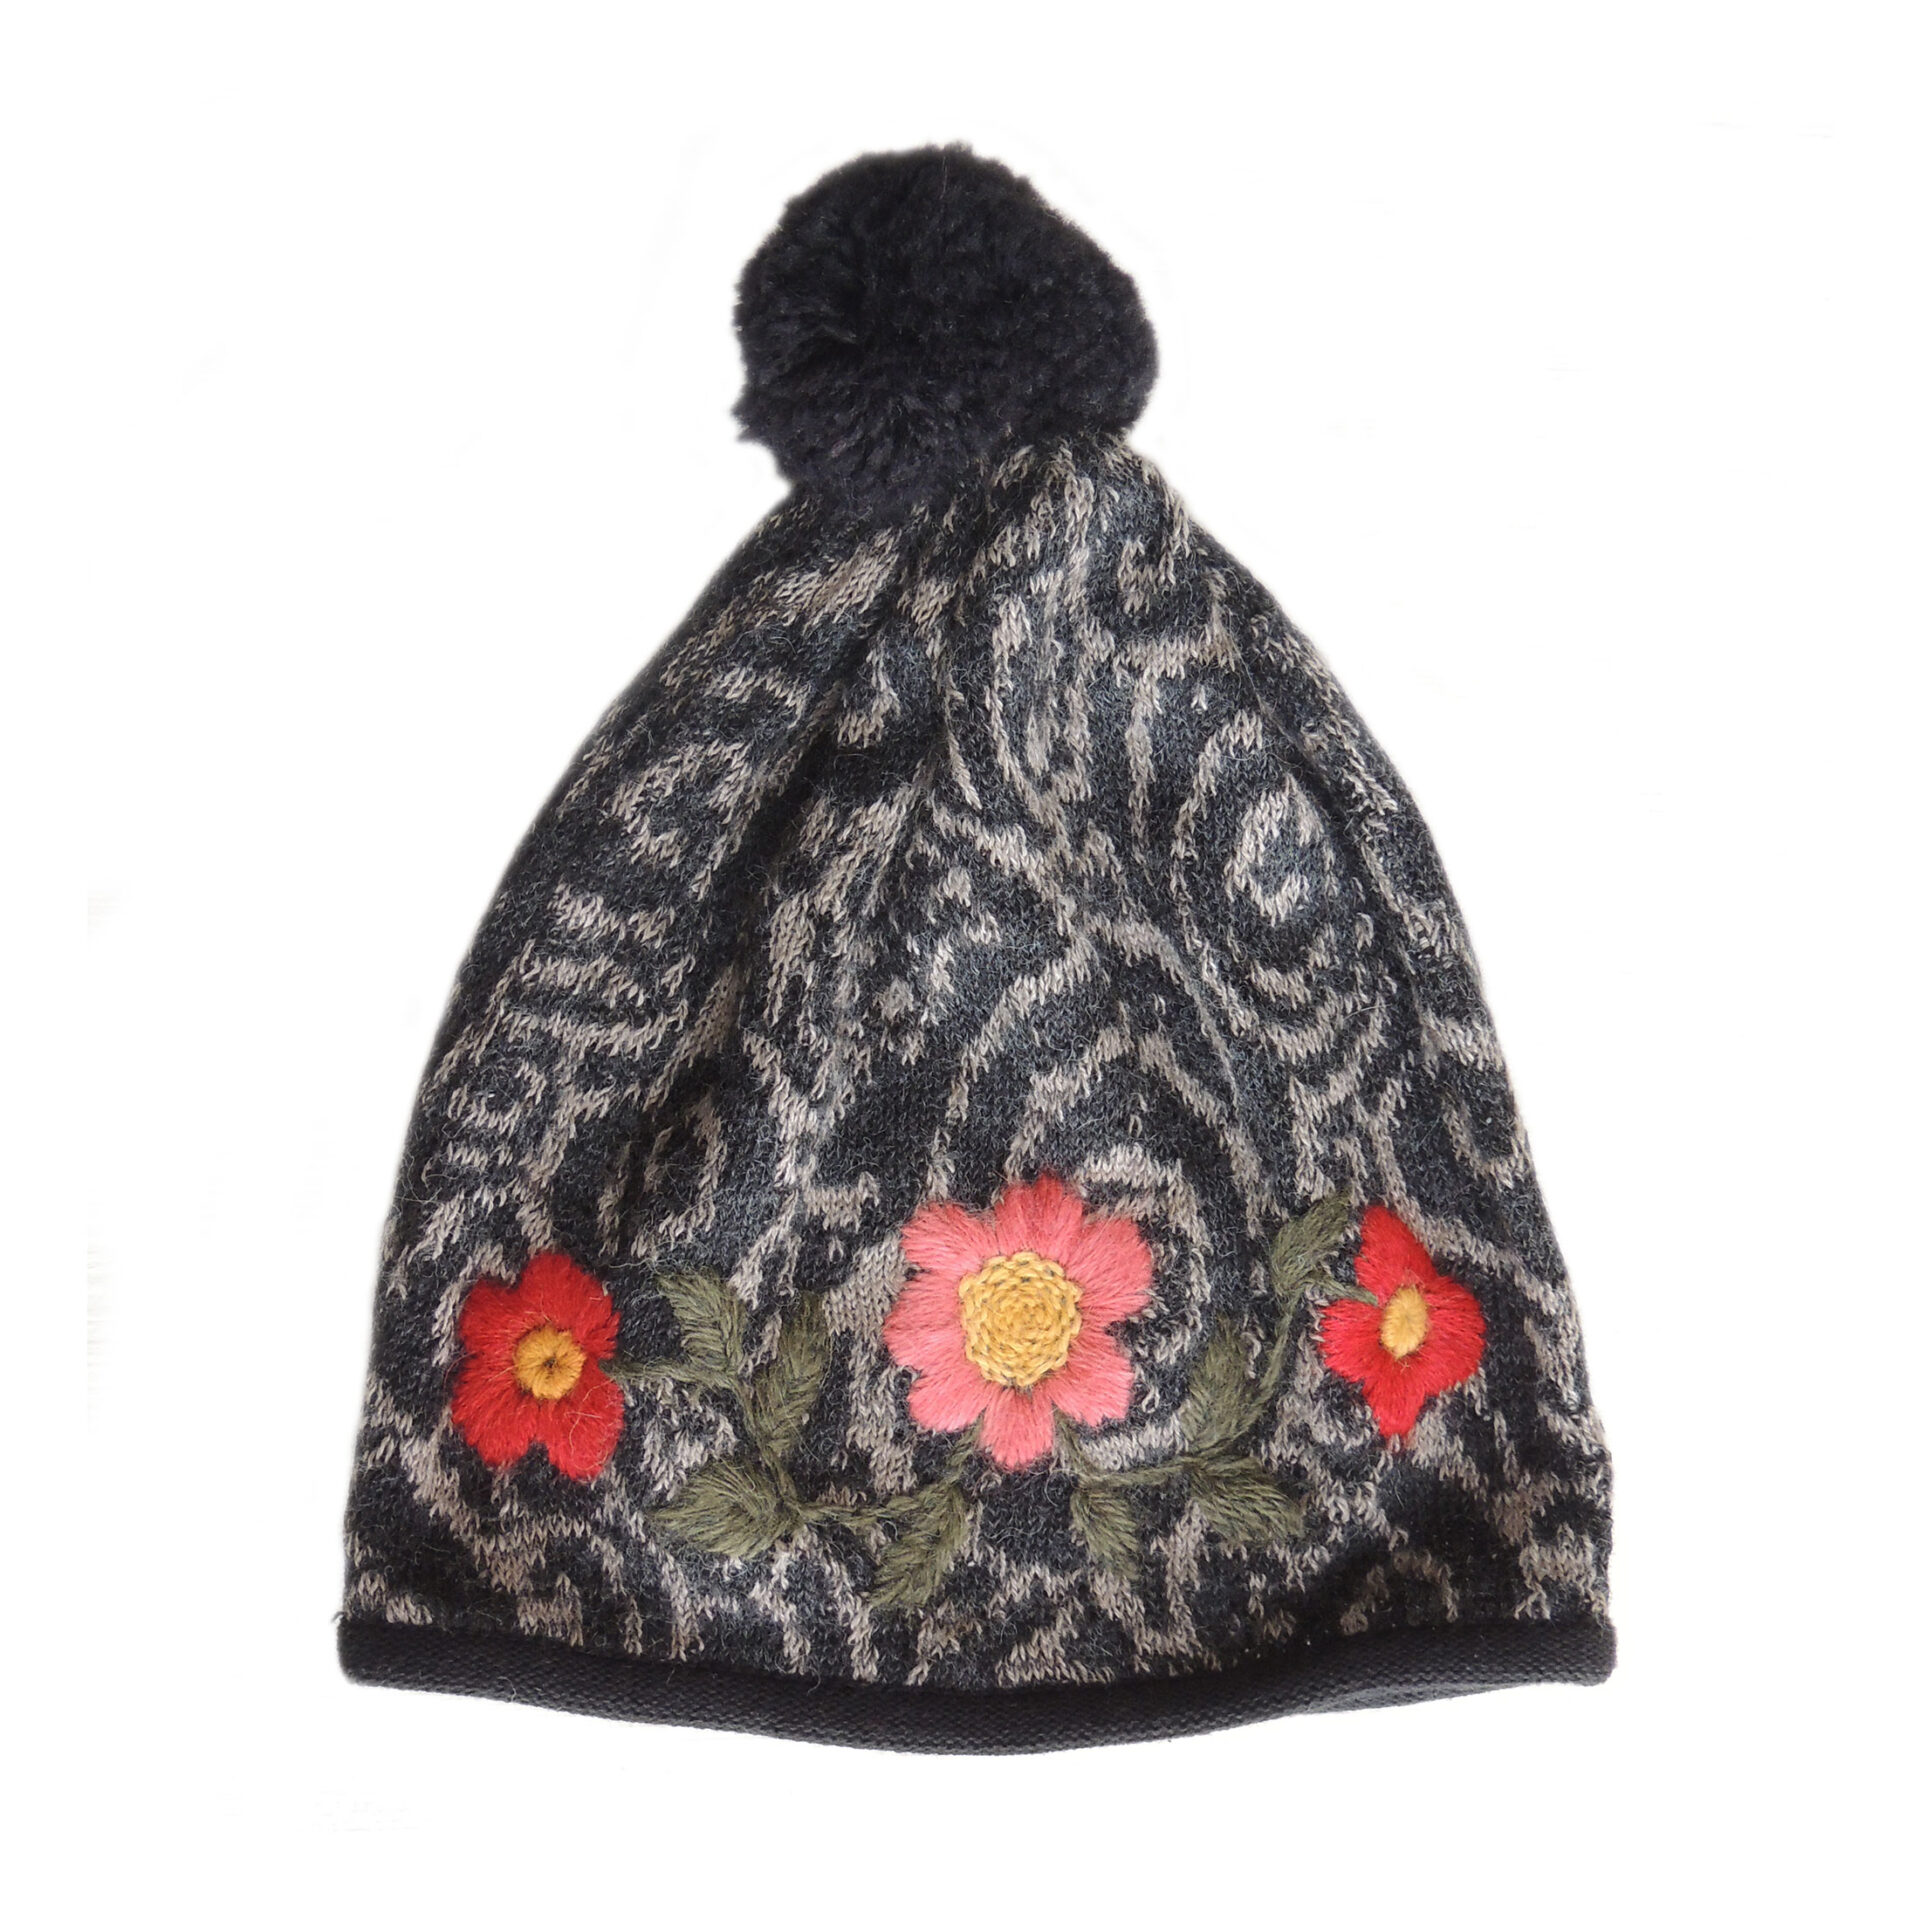 PopsFL wholesale producer PFL Knitwear jacquard knitted beanie with embroided detail and pompon.